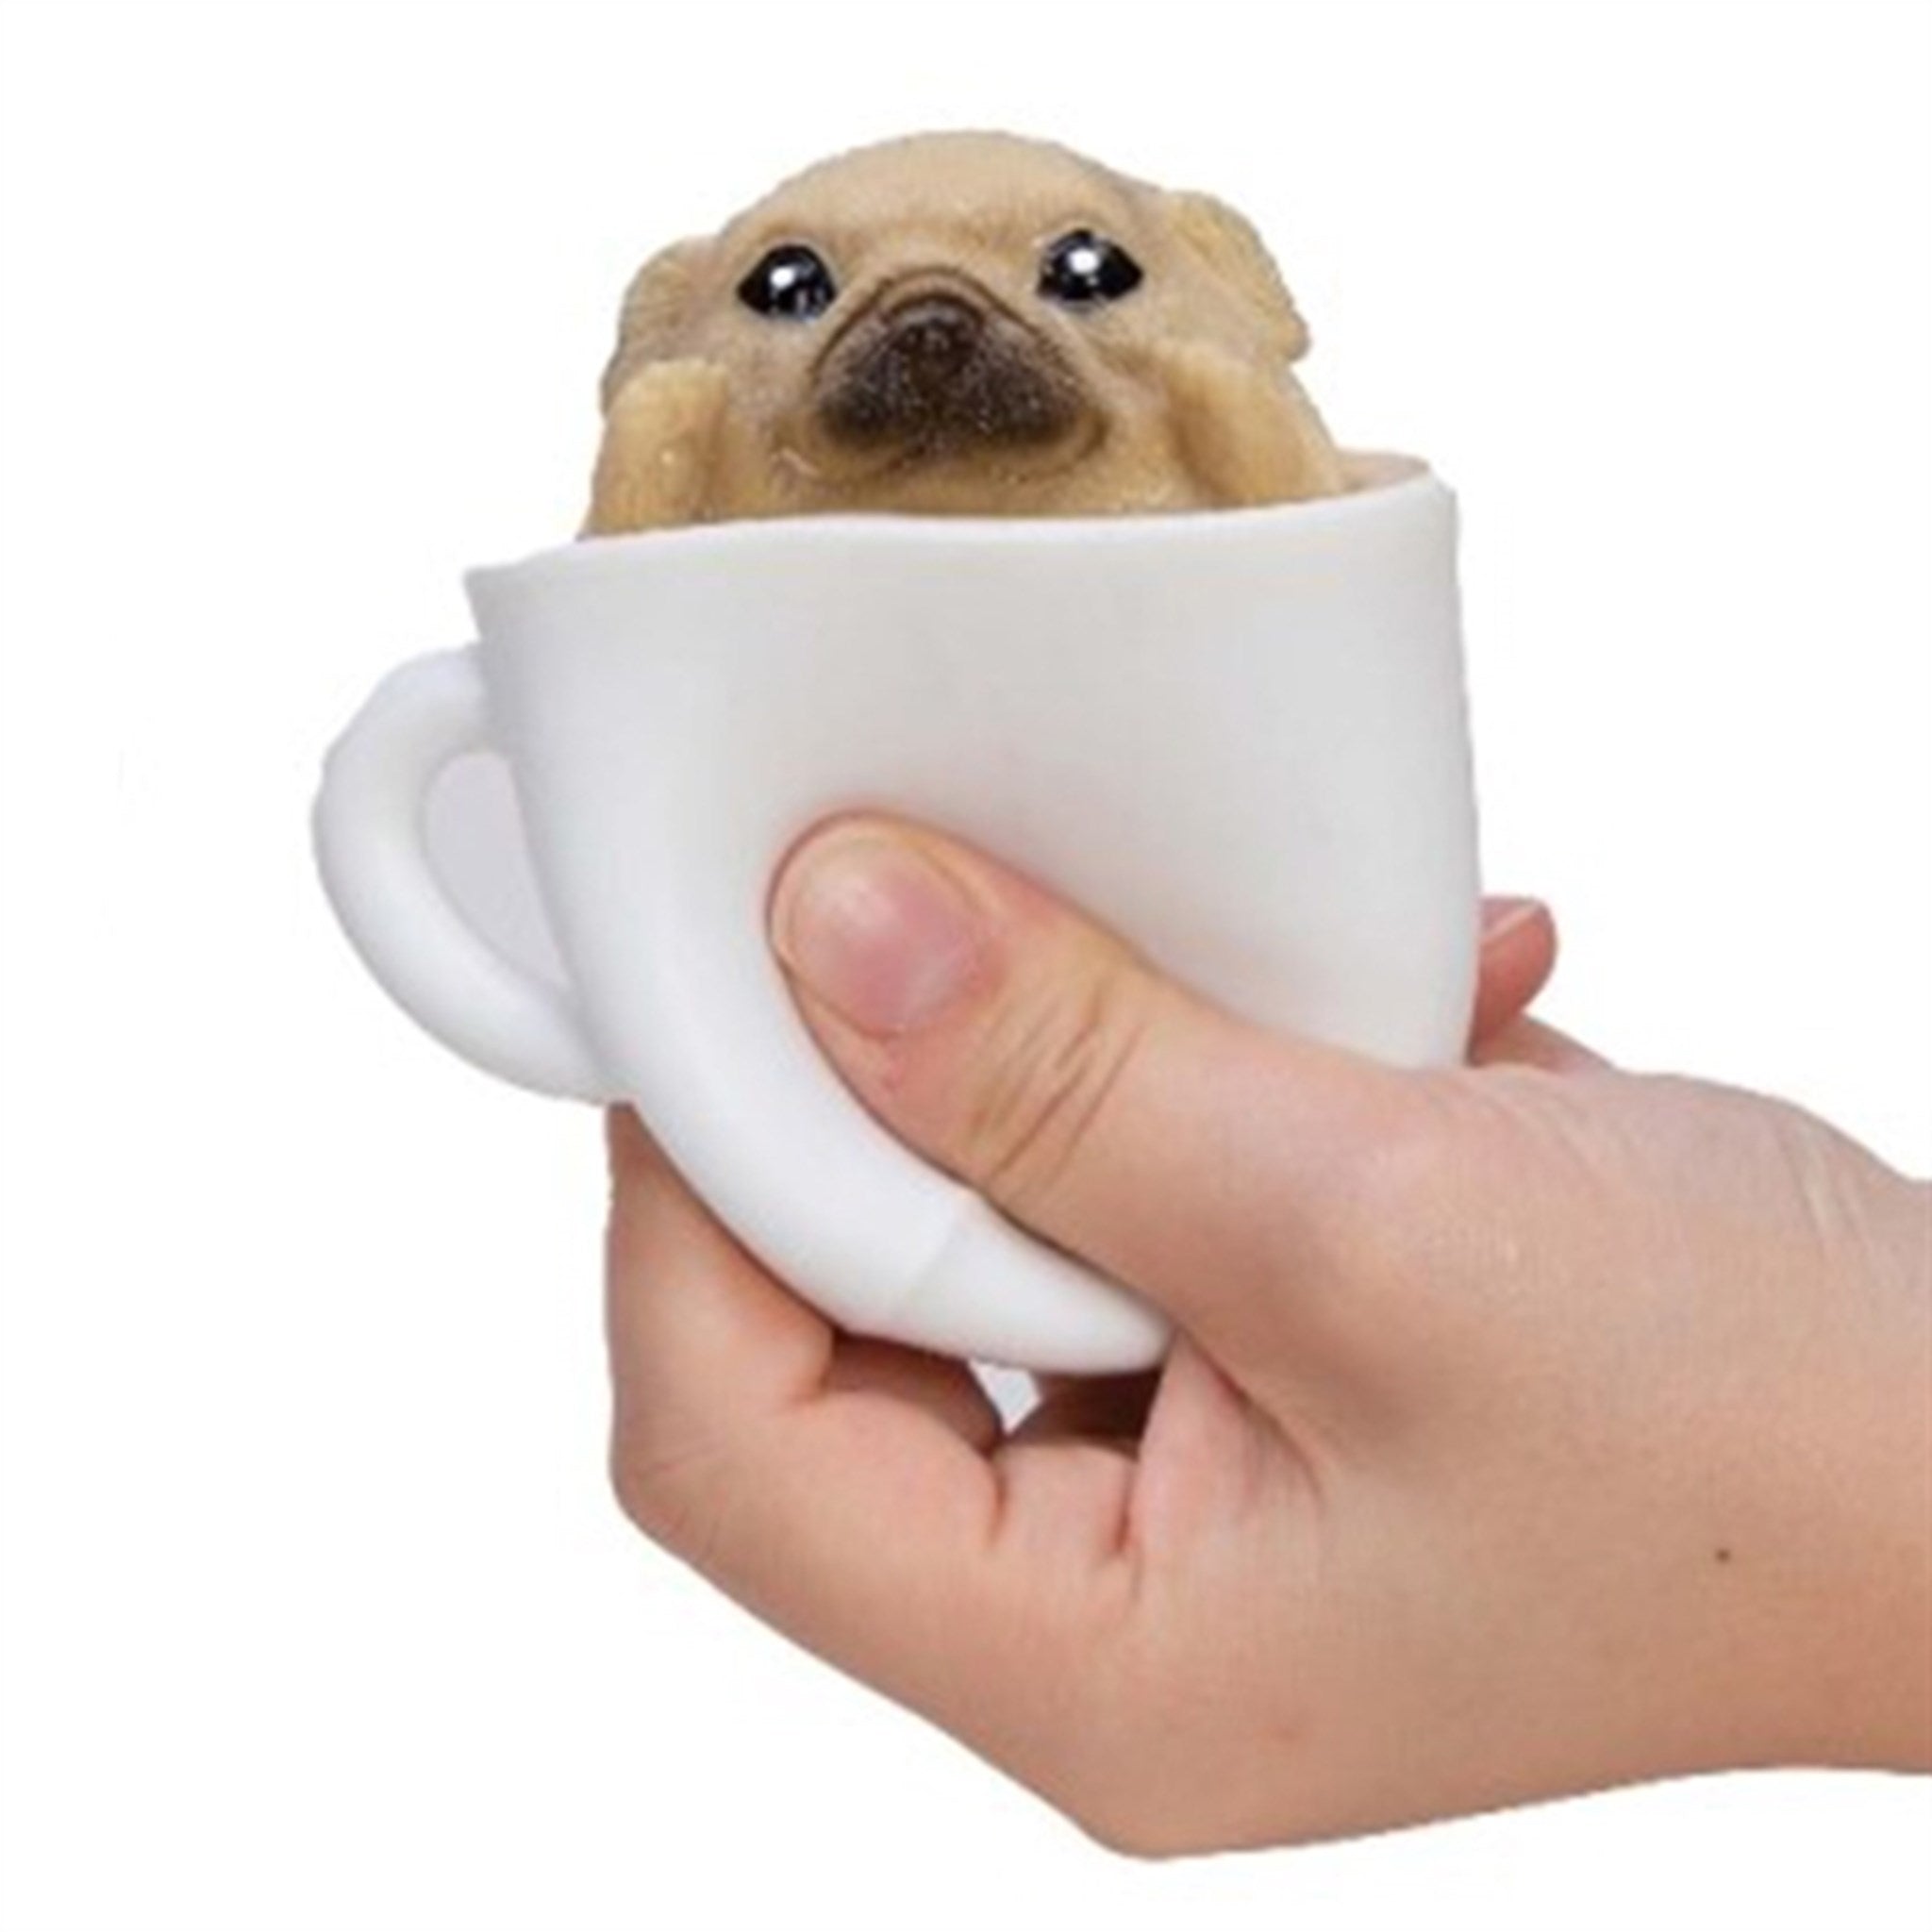 Schylling Pup in a Cup Pugachino